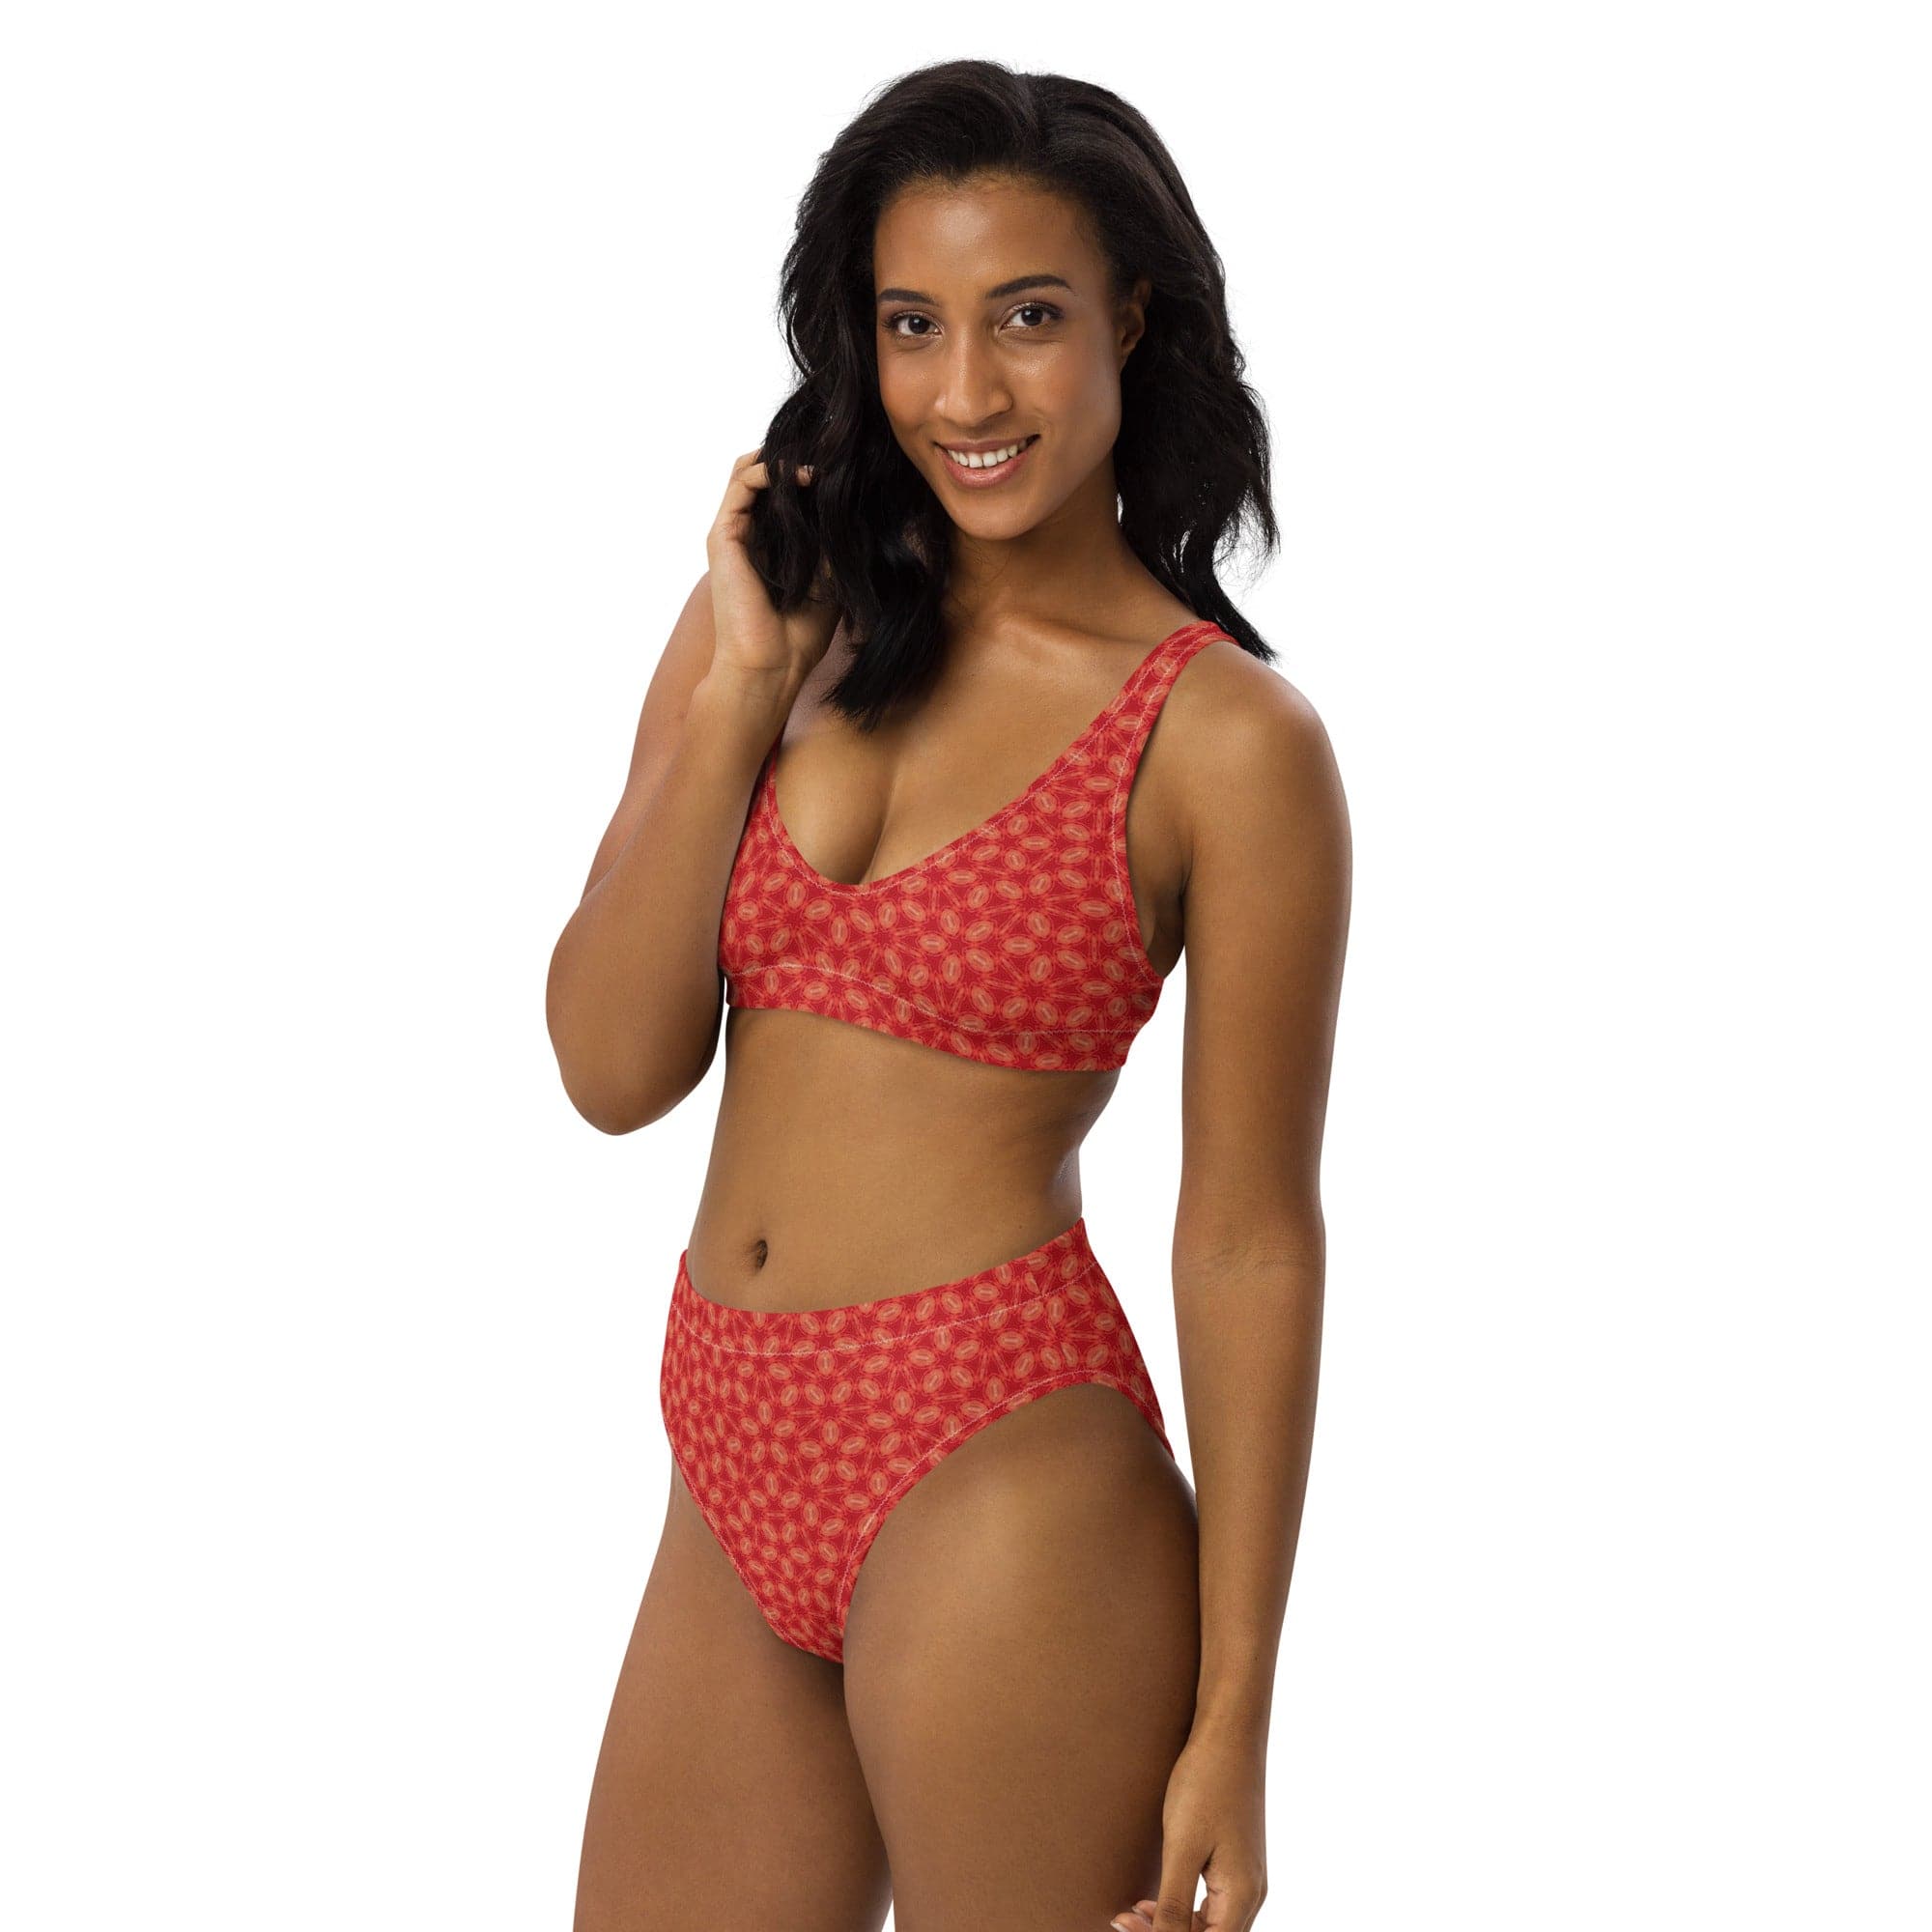 Happy Red Buttercup, Recycled high-waisted bikini, by Sensus Studio Design